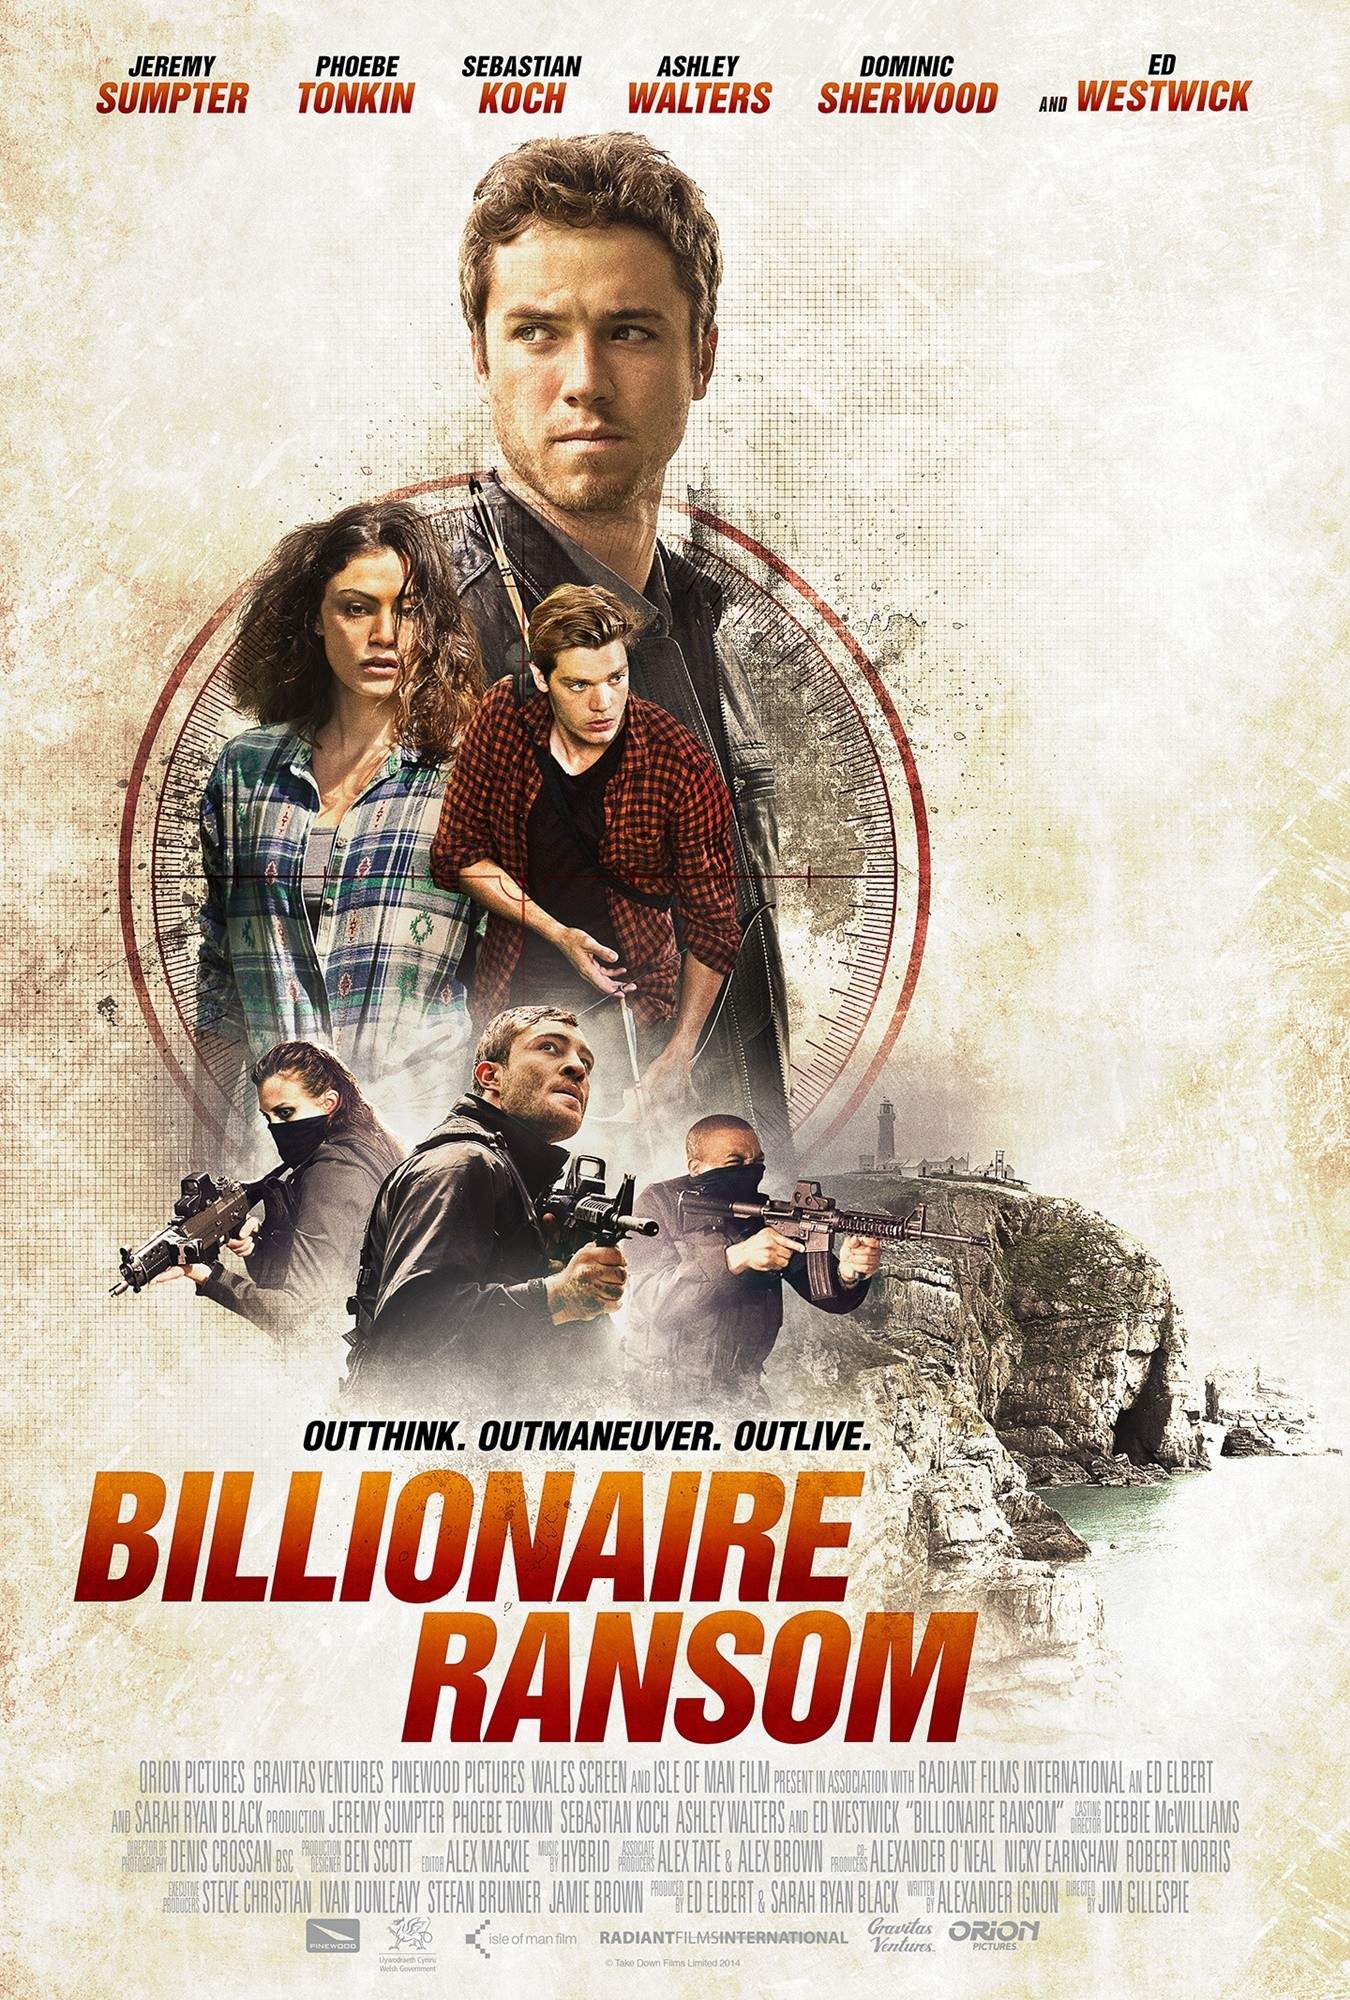 Billionaire Ransom (2016) Pictures, Trailer, Reviews, News, DVD and Soundtrack